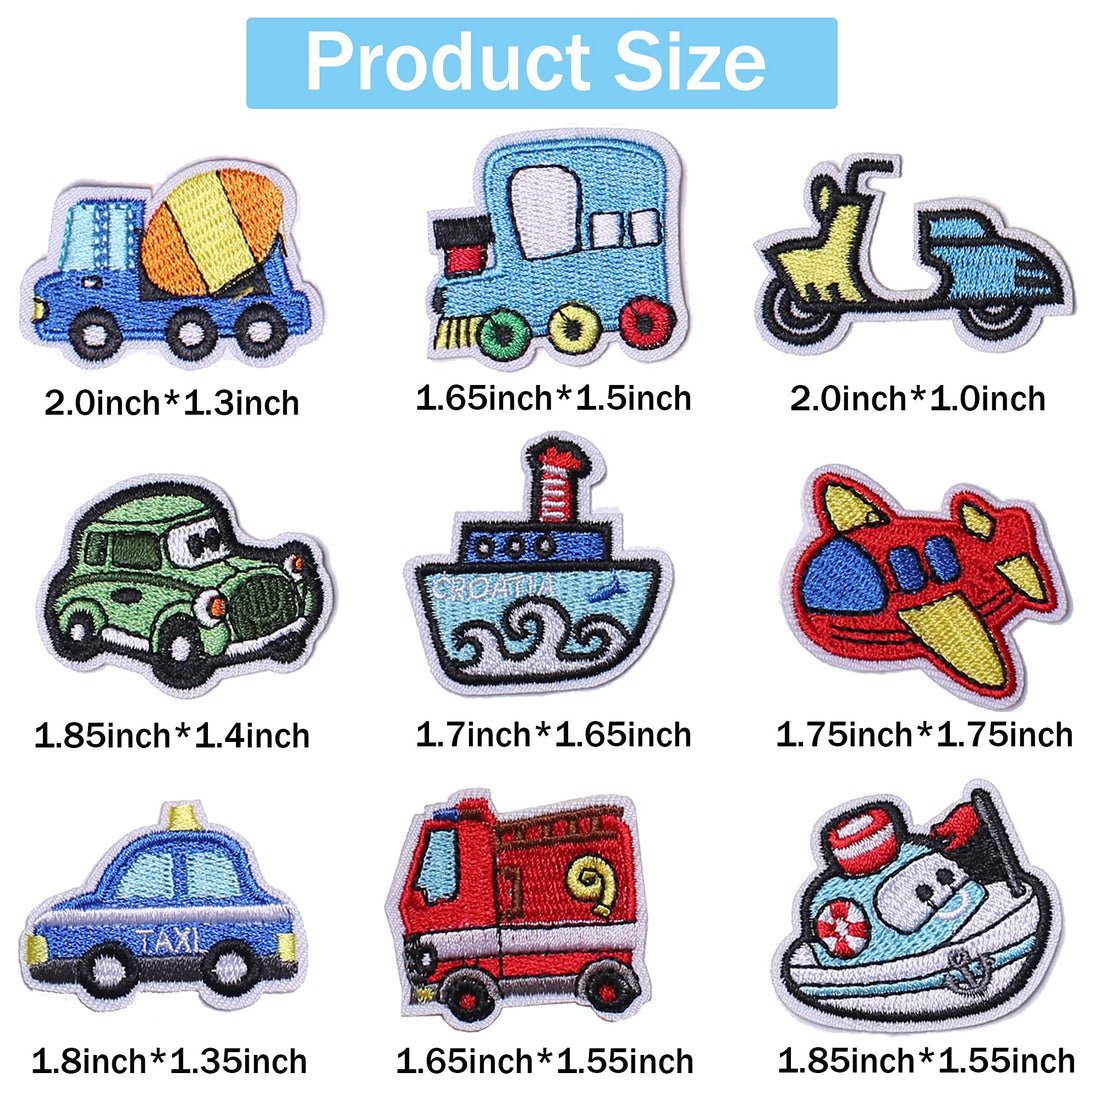 Set of 30 pcs Car Embroidered Iron on Patch for Clothes, Iron-on Patches / Sew-on Appliques Patches for Clothing, Jackets, Backpacks, Caps, Jeans